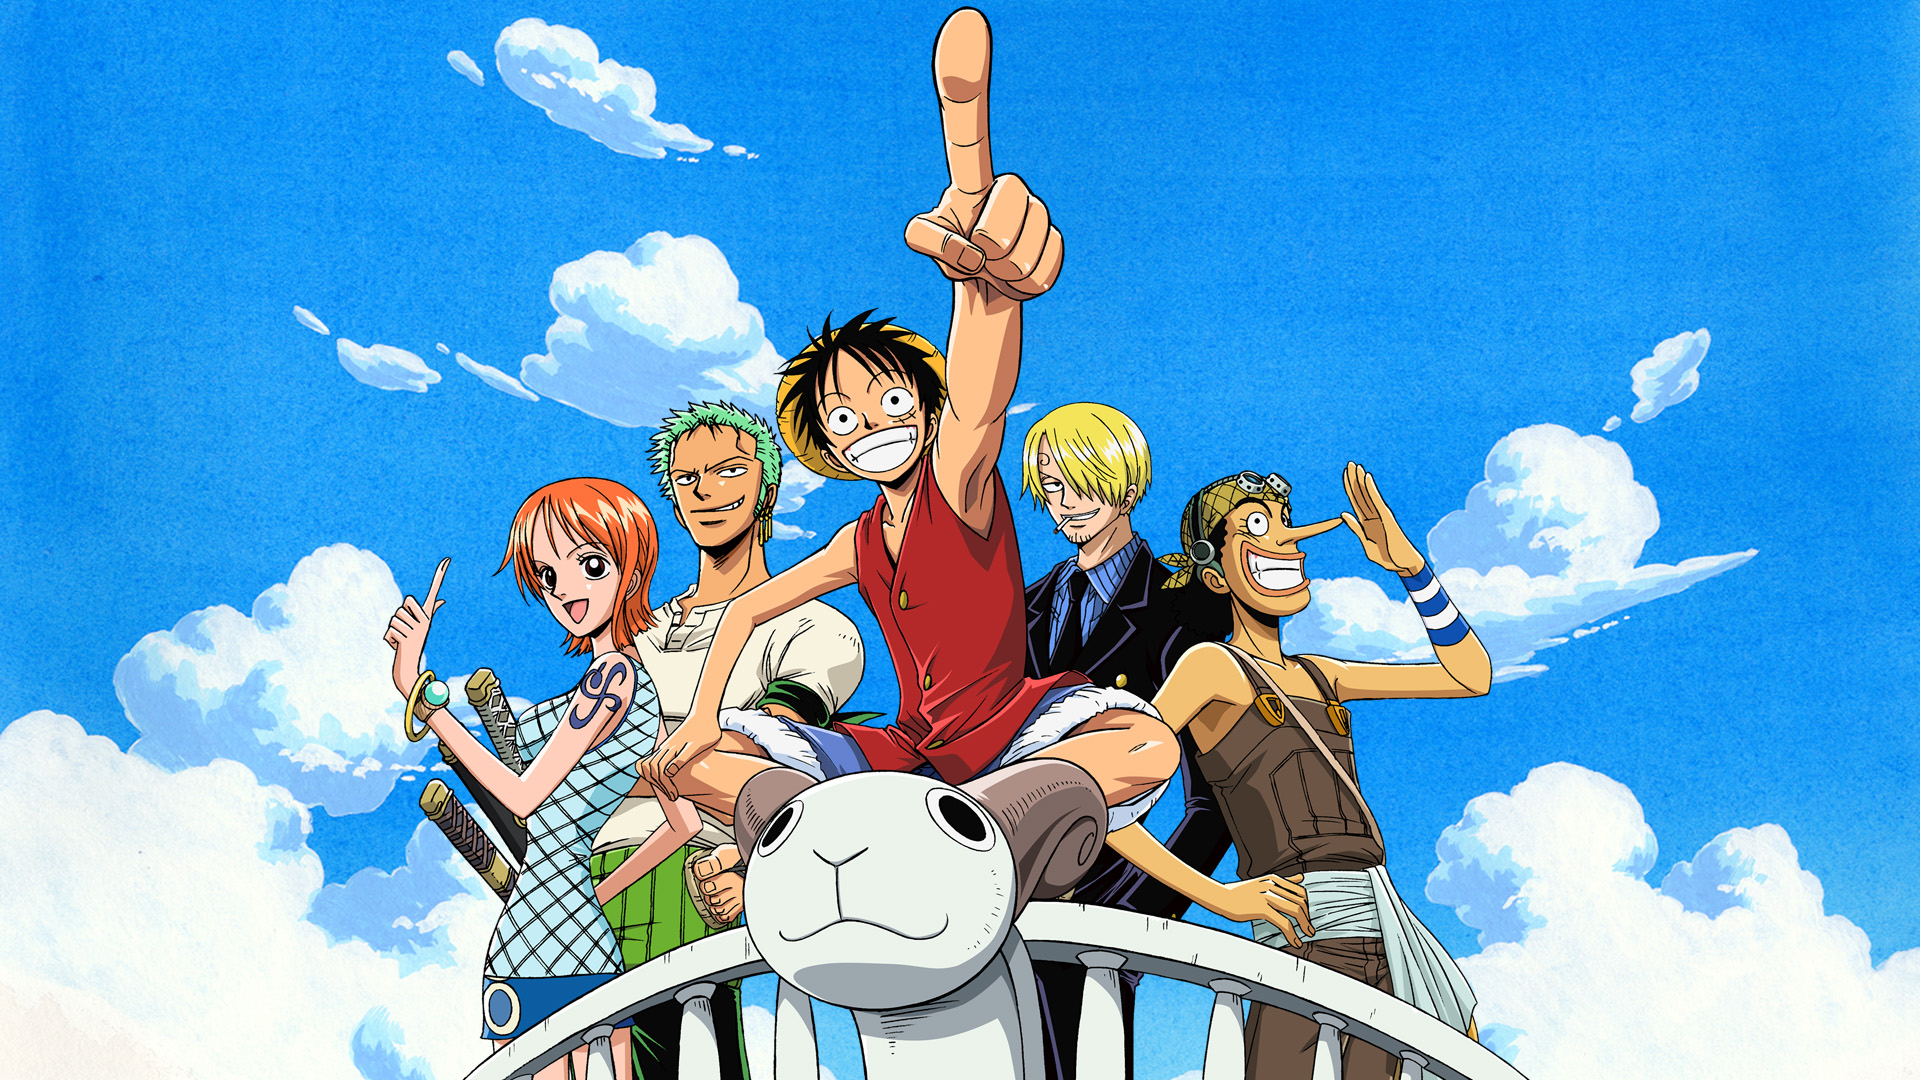 Where can I watch One Piece from episode 1? - Quora